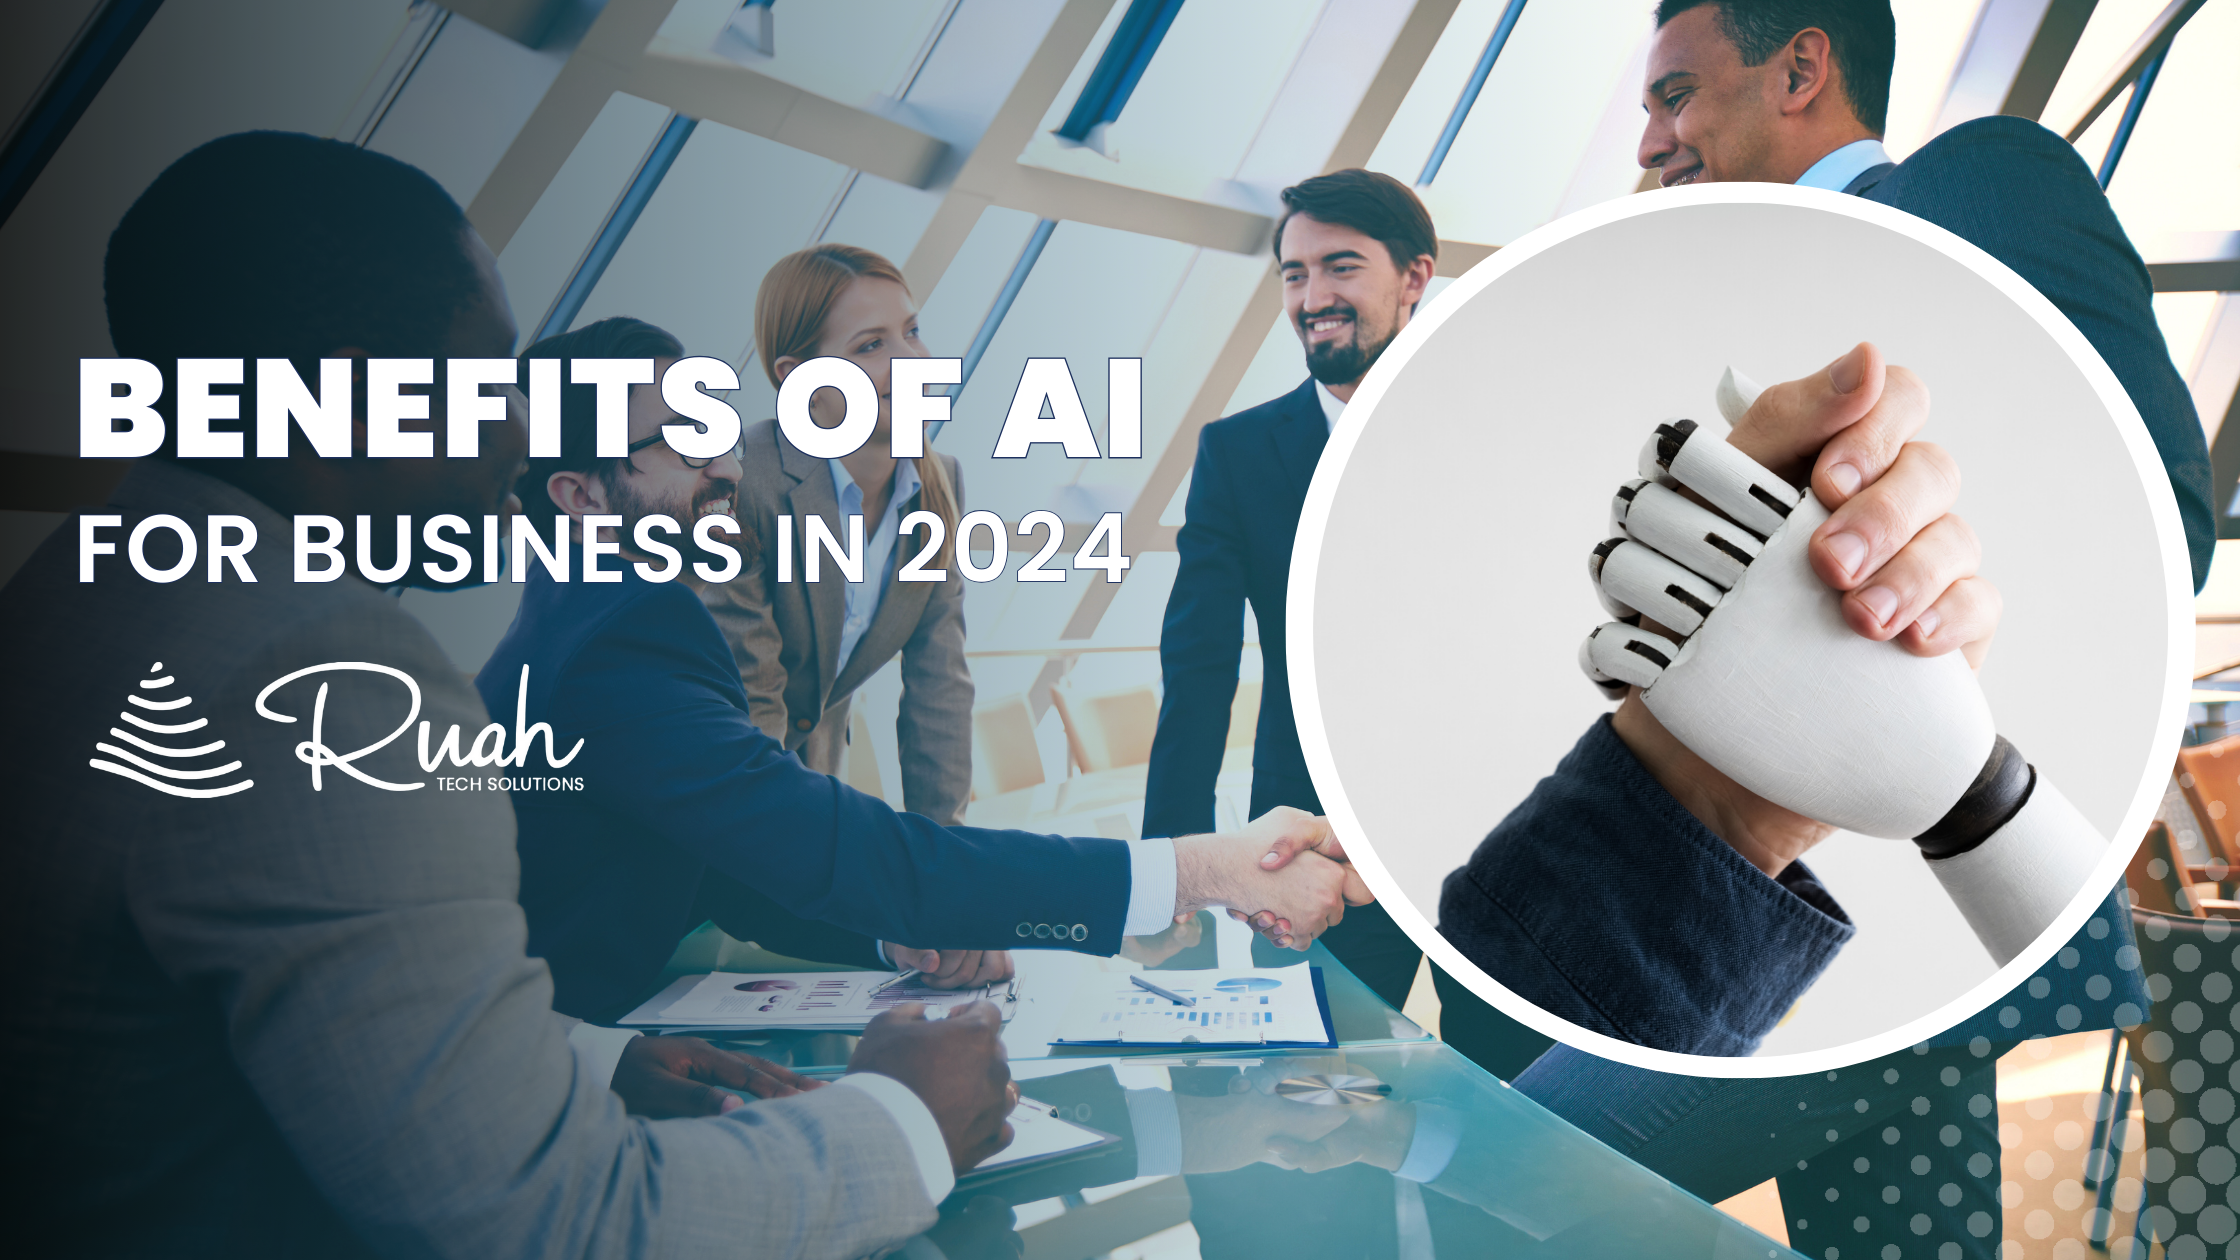 Business benefits of AI in 2024